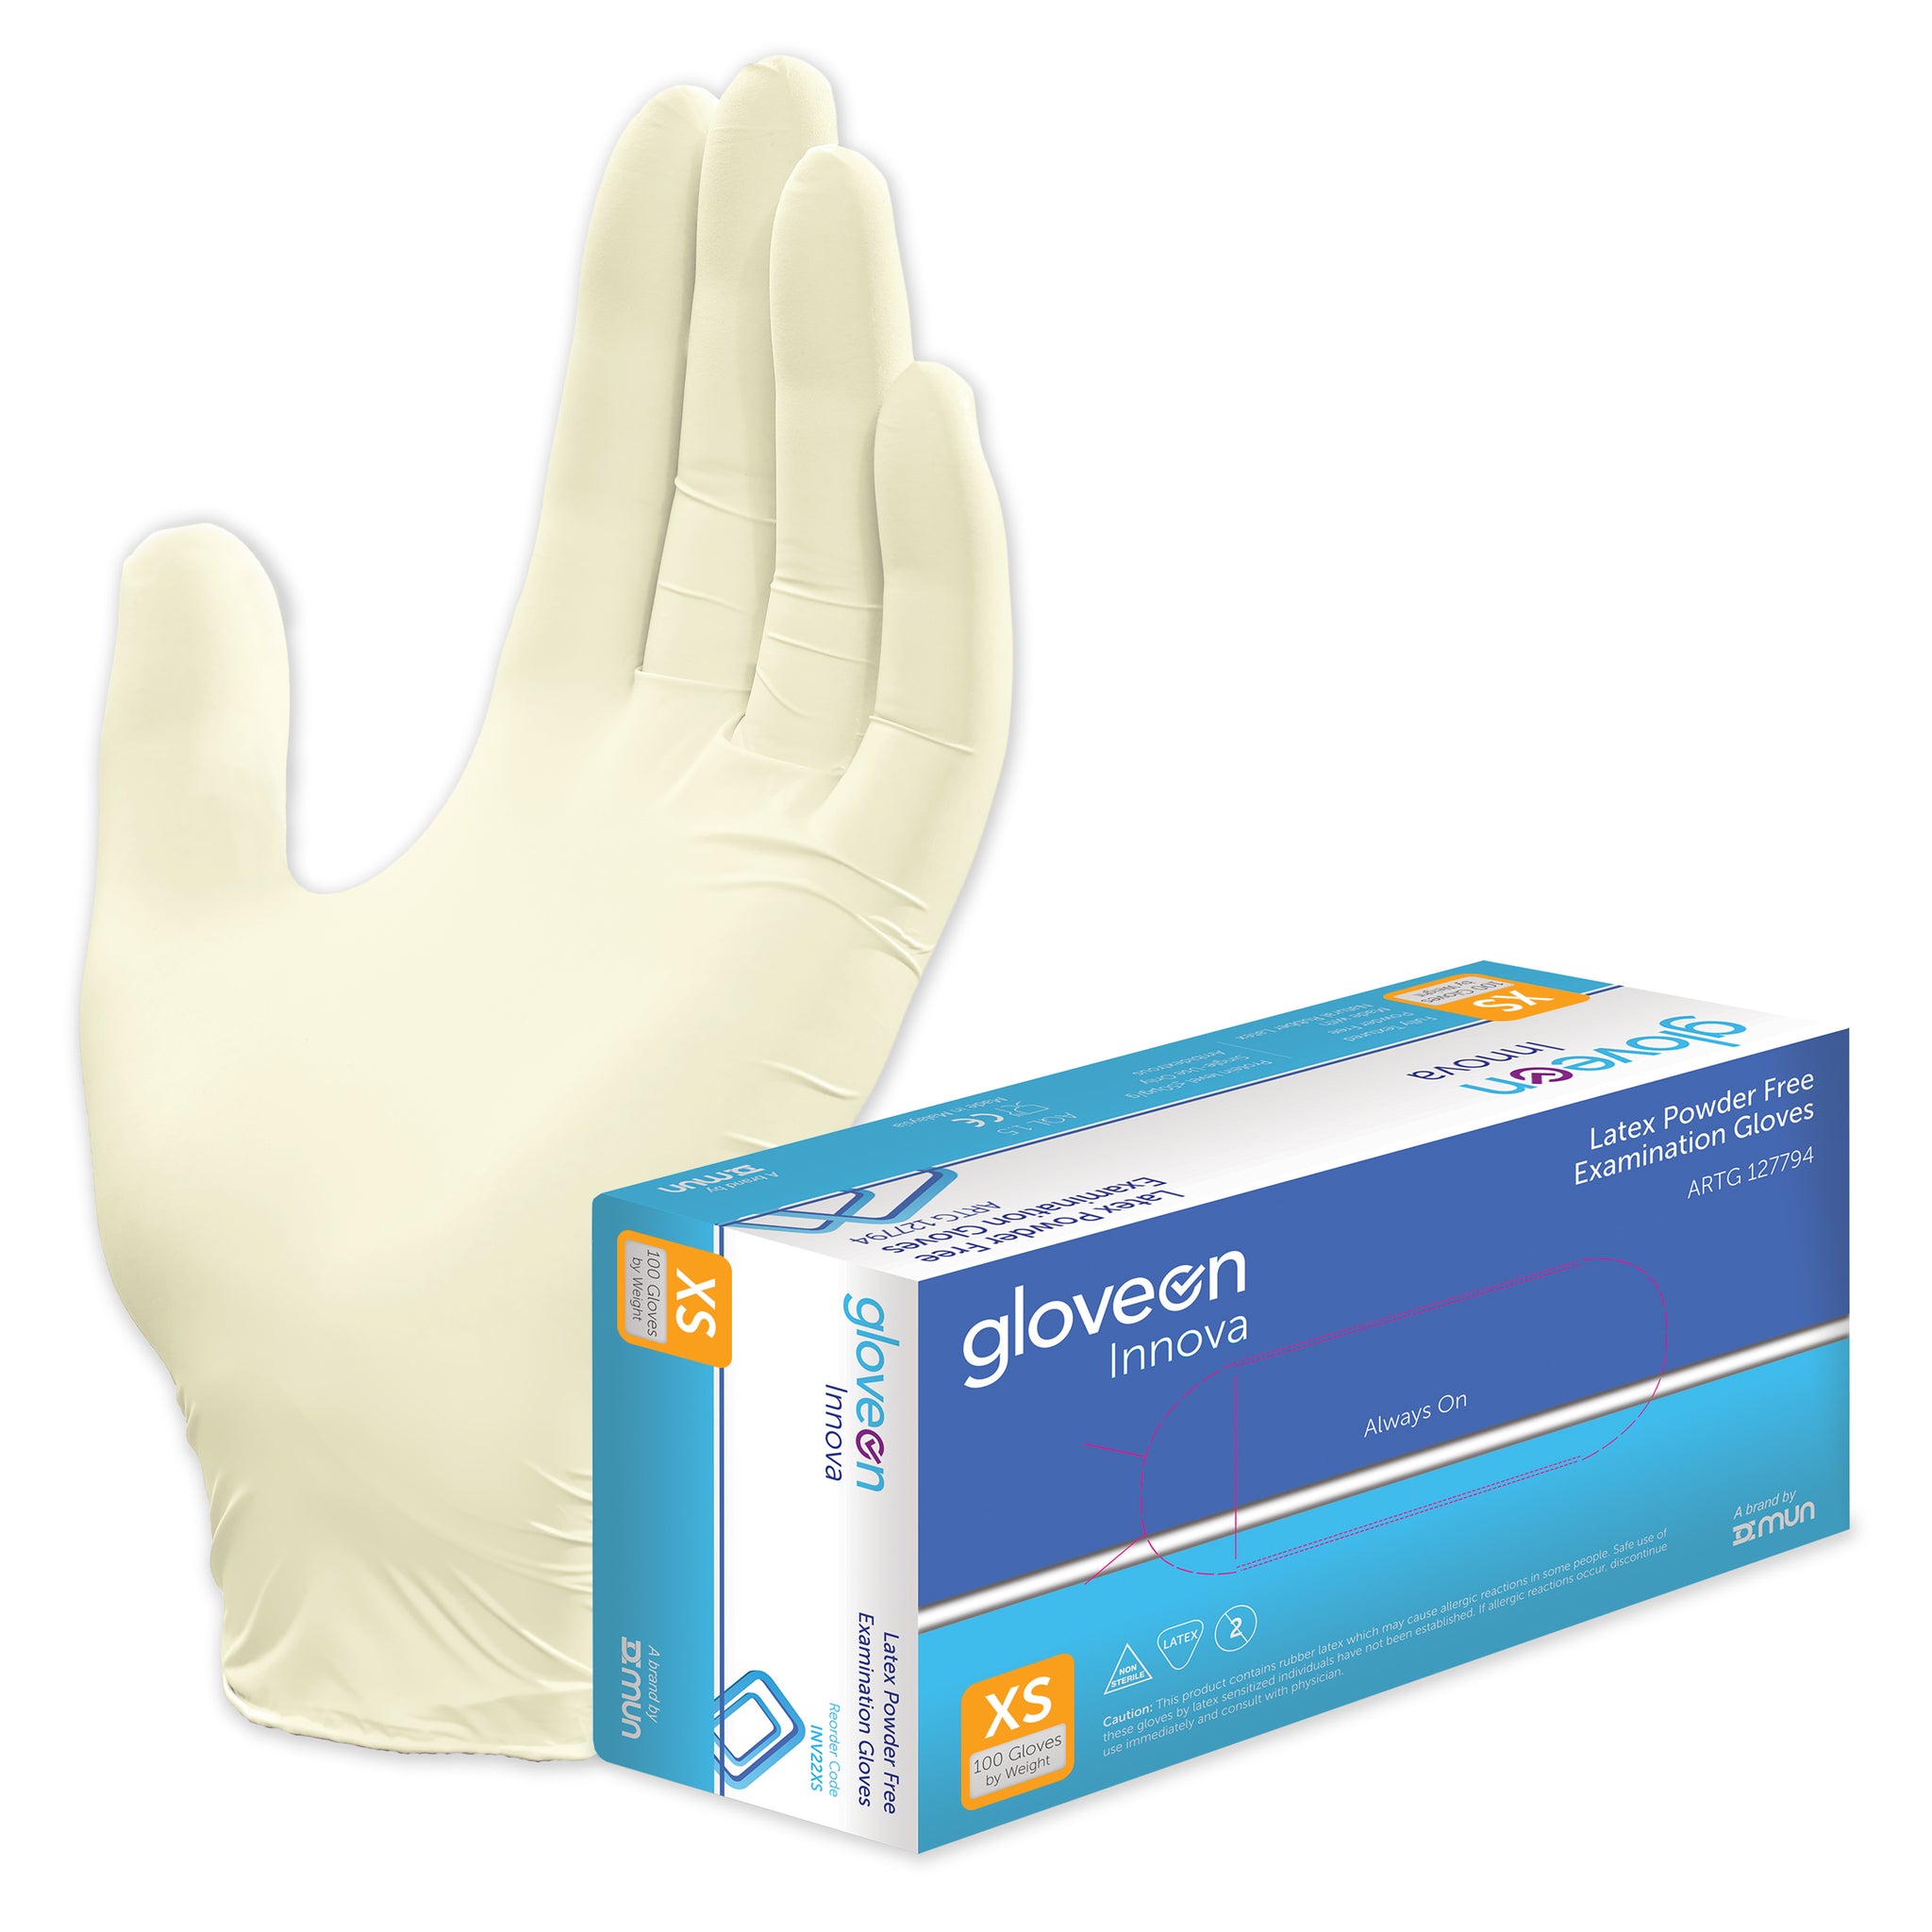 Exam Gloves, Powder Free, Non-Sterile, Fully Textured, Standard Cuff, Natural Colour - Box of 100, XS